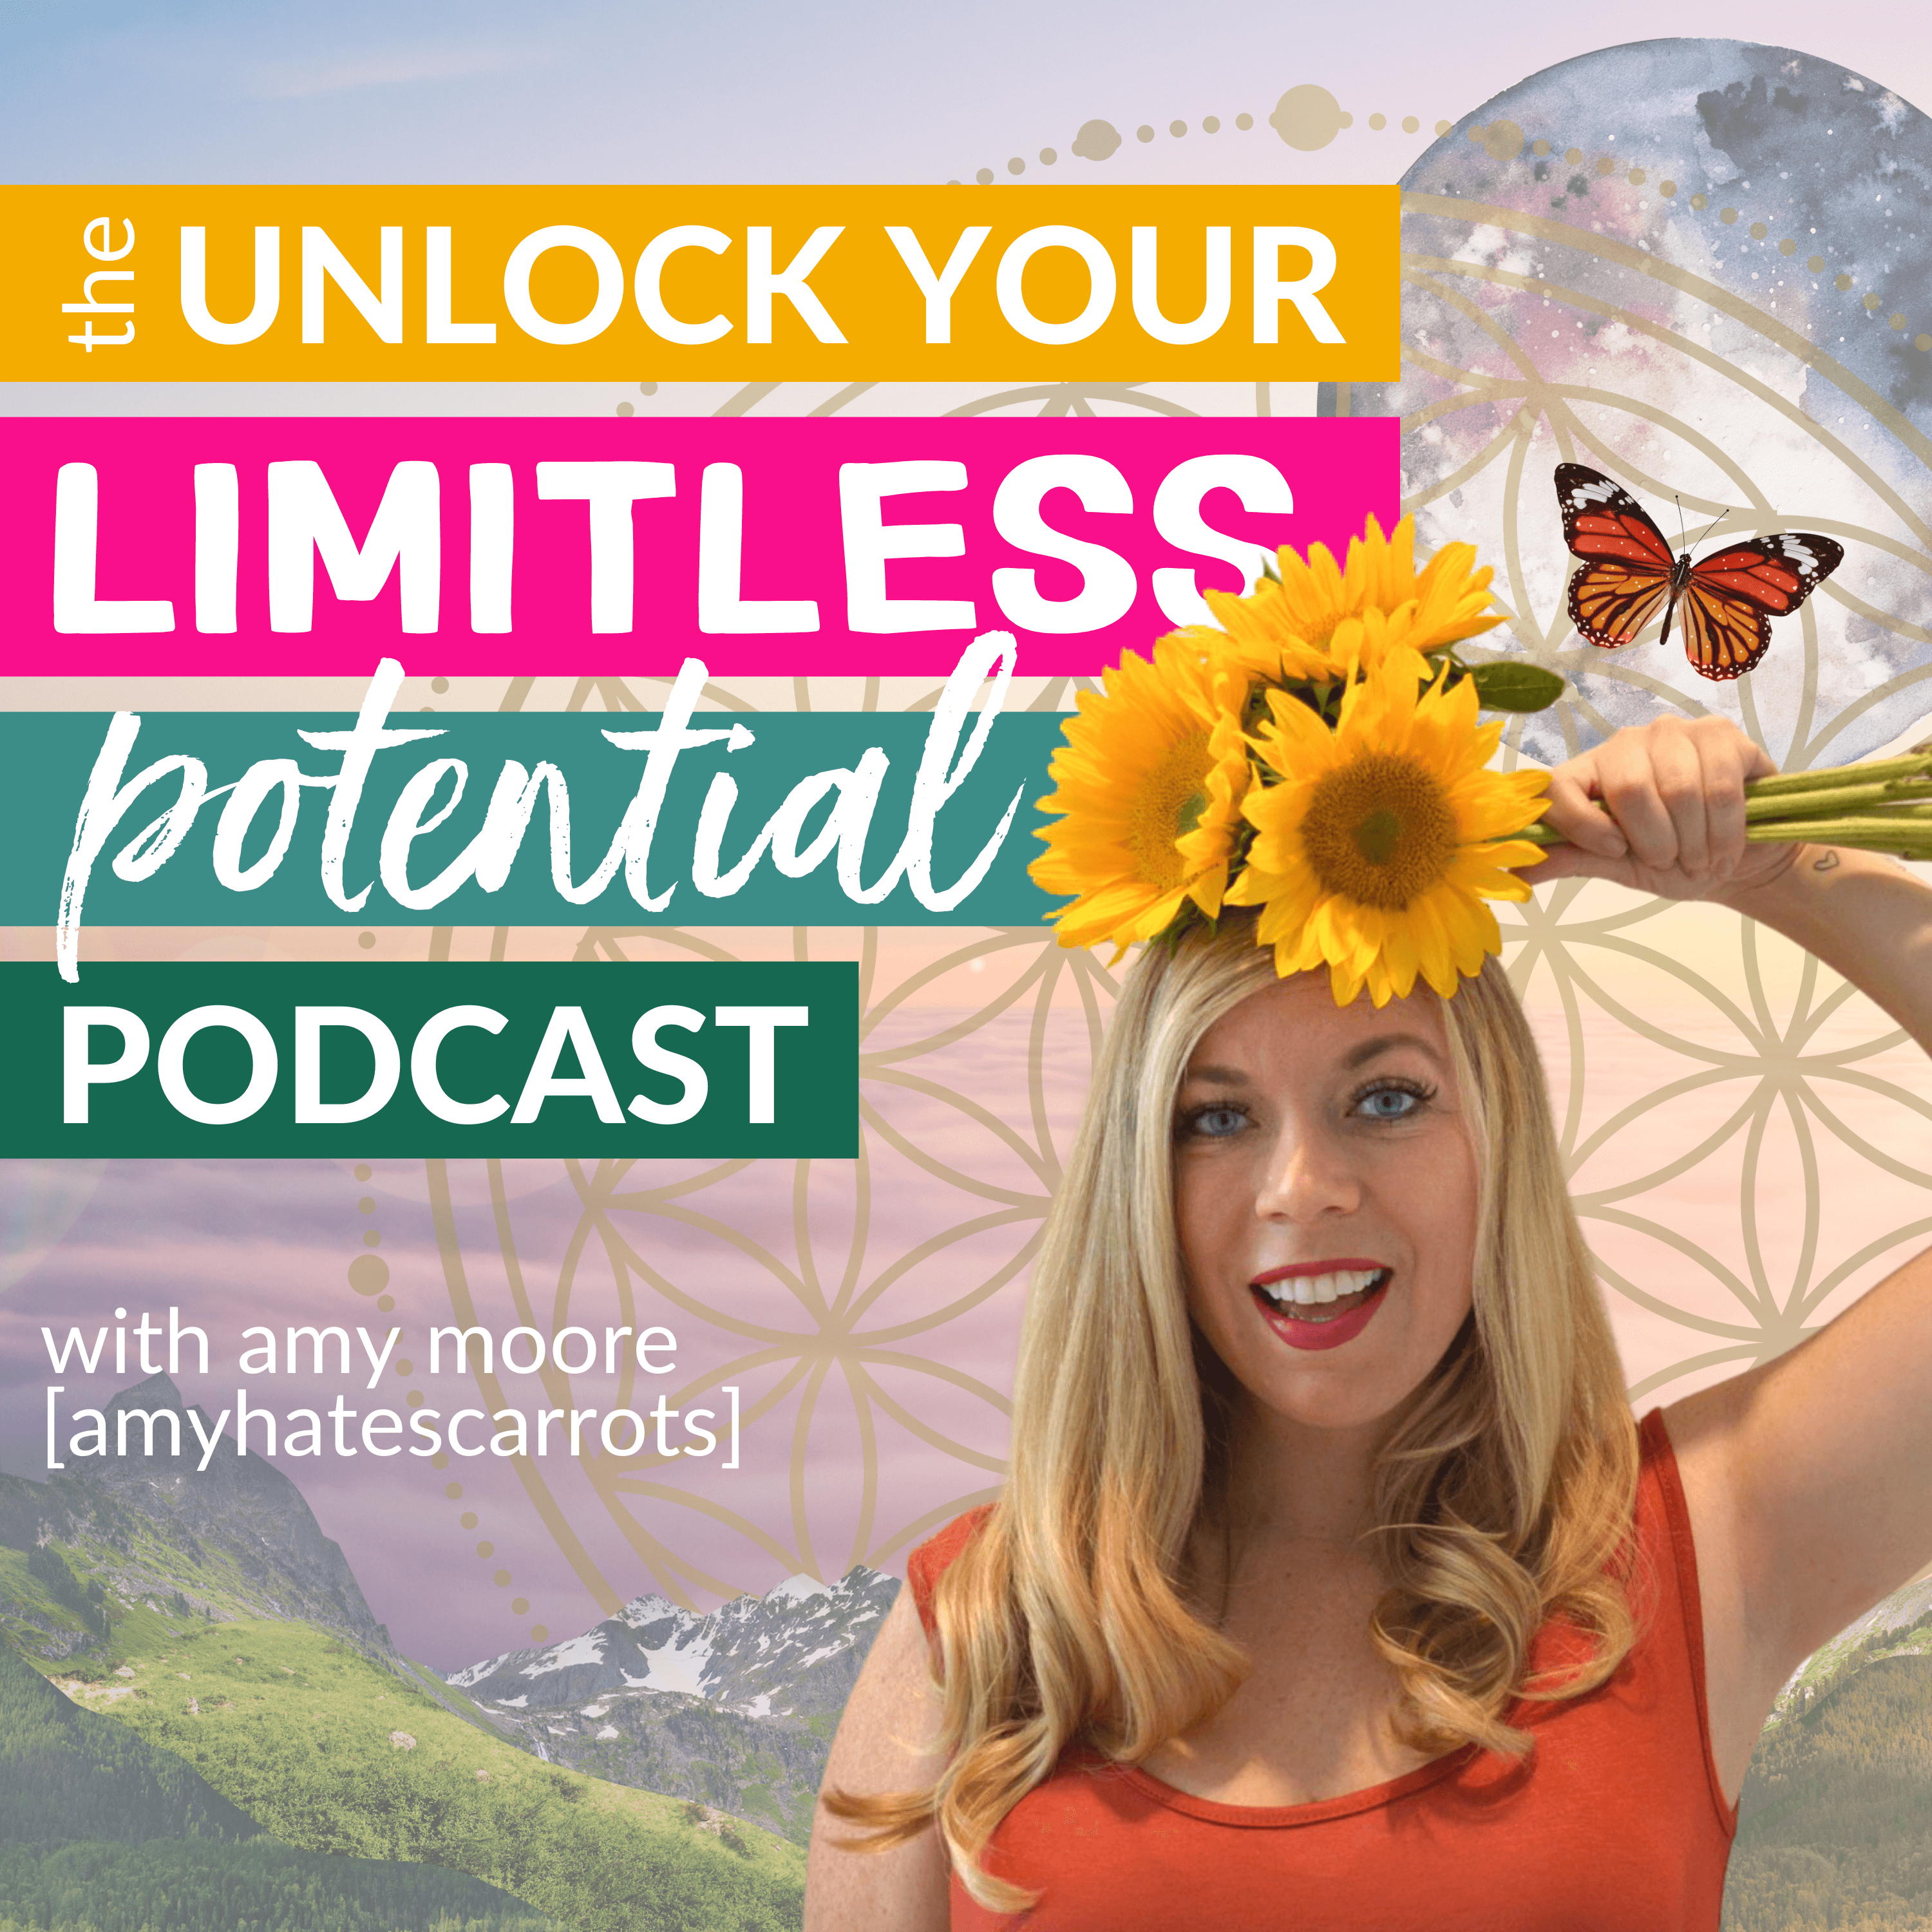 The Unlock Your Limitless Potential Podcast with Amy Moore | Amy Hates Carrots